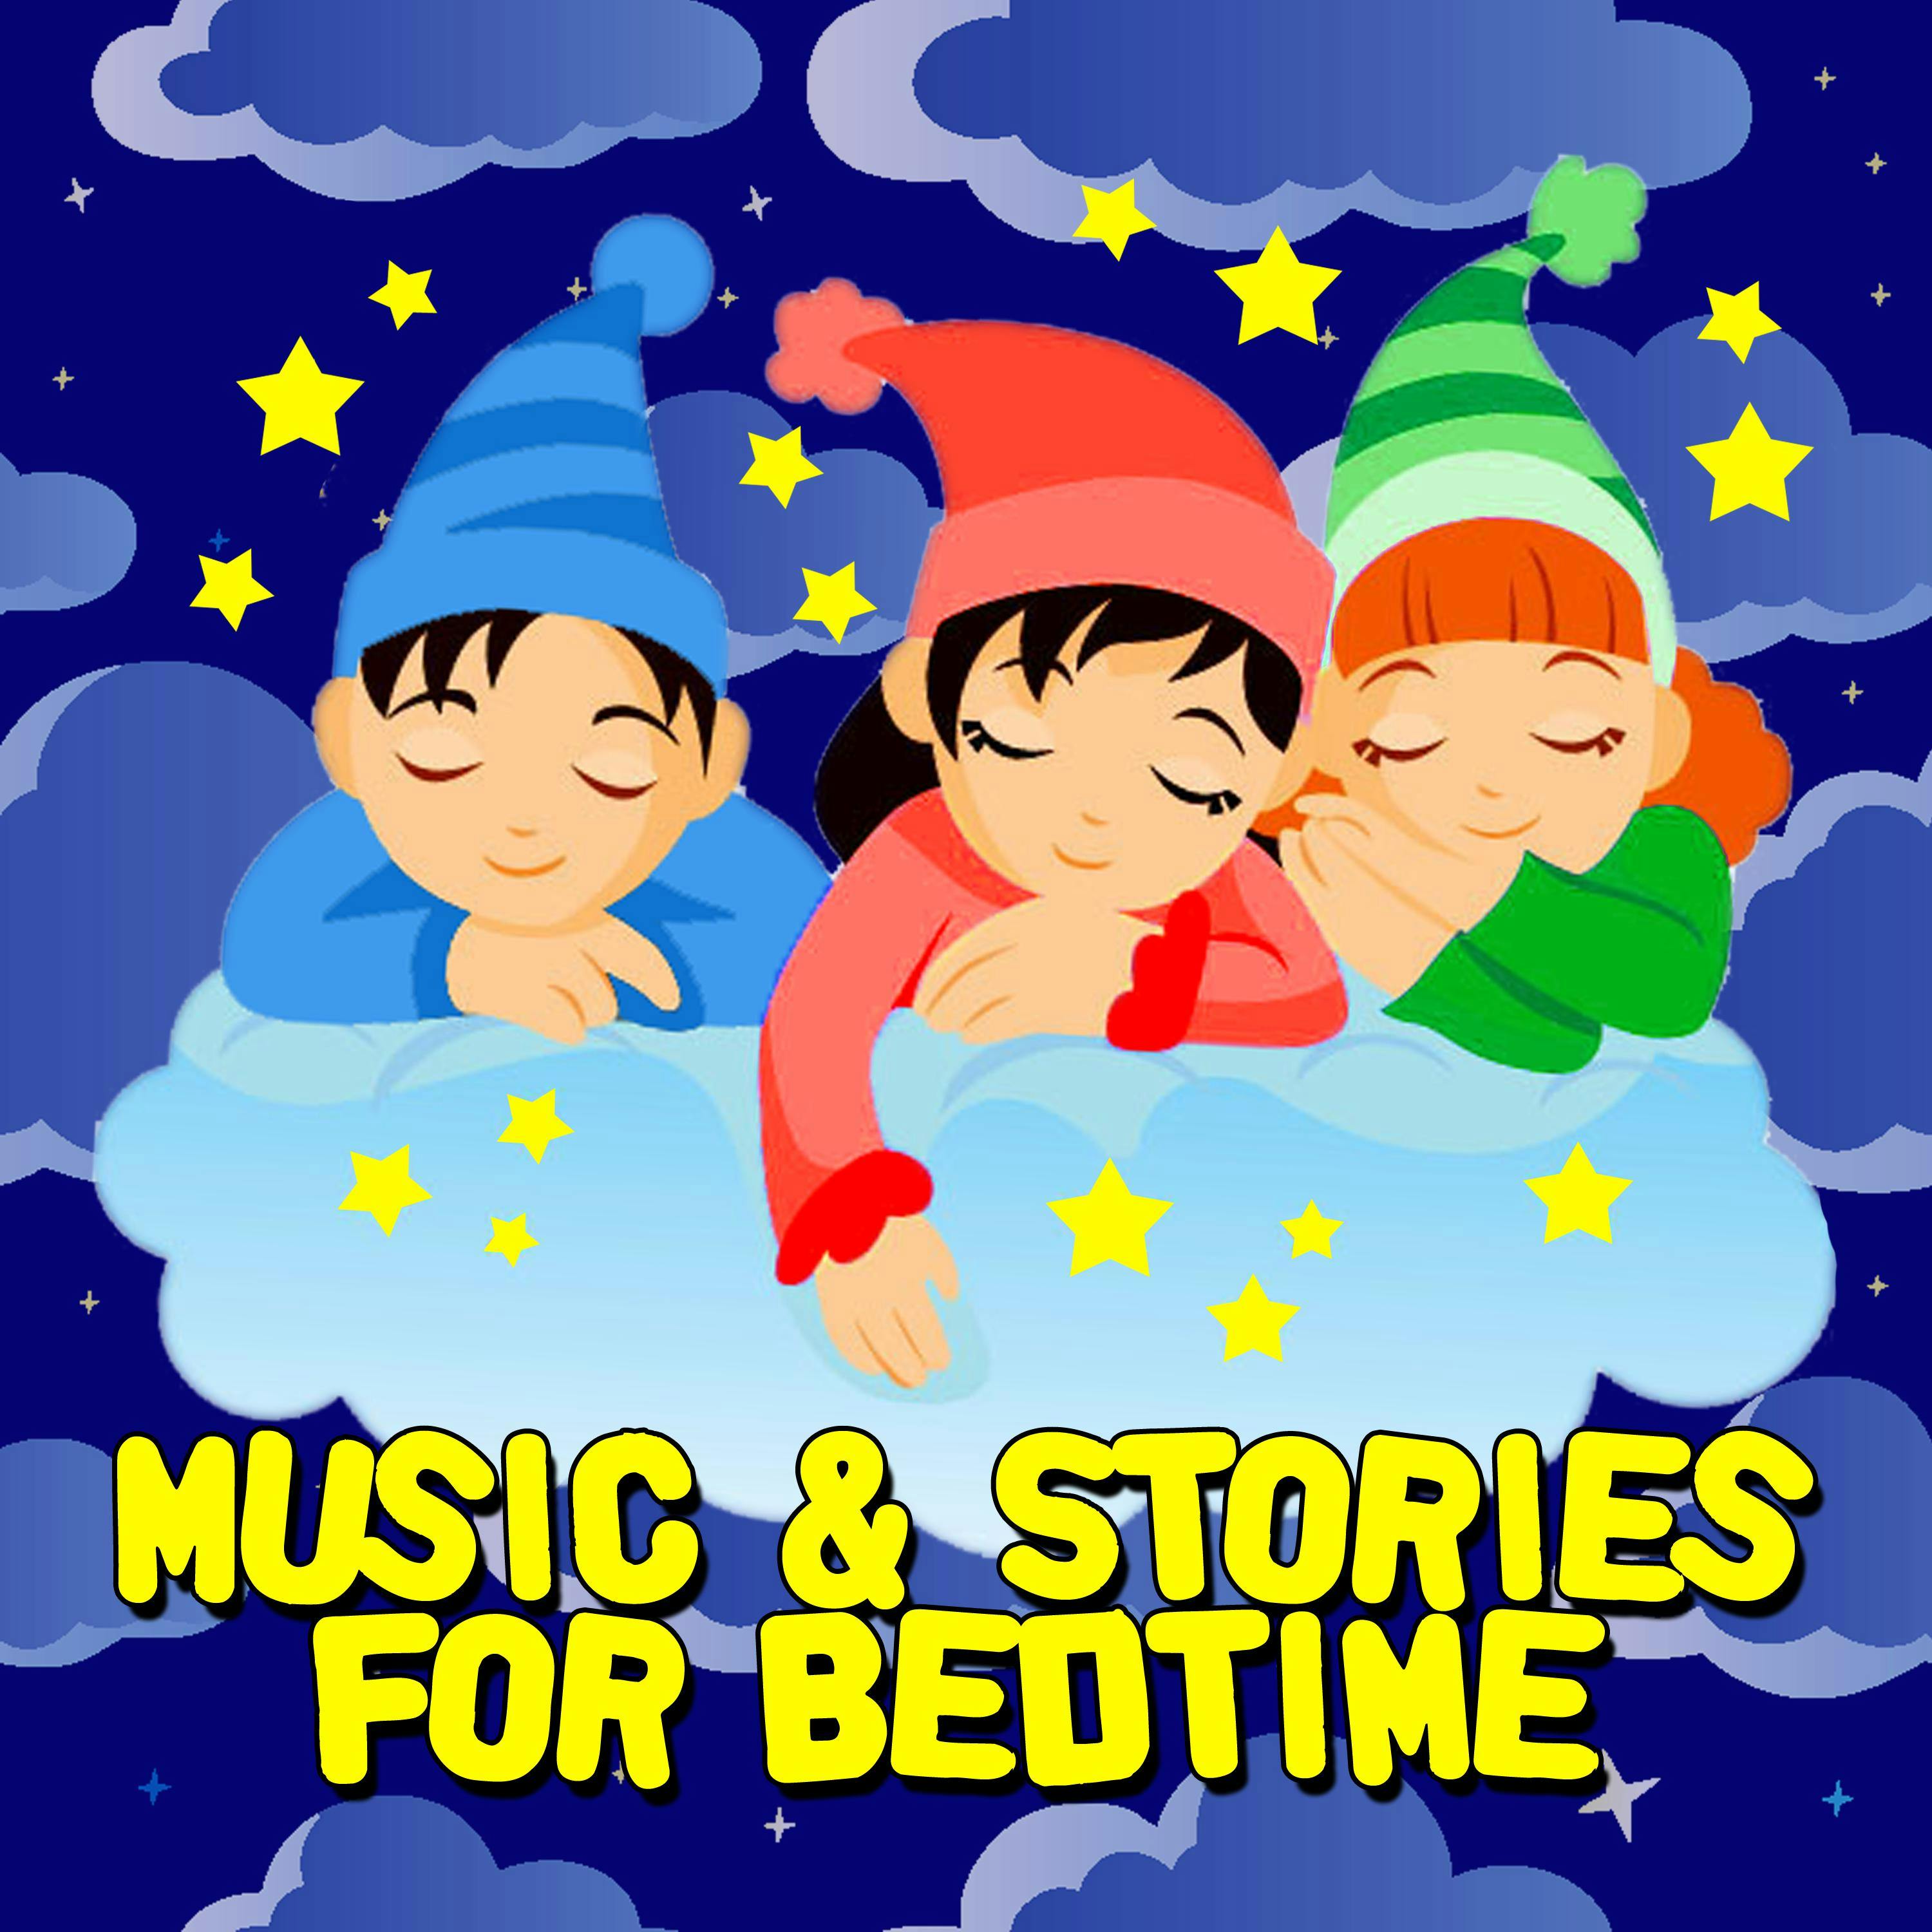 Music & Stories for Bedtime - undefined